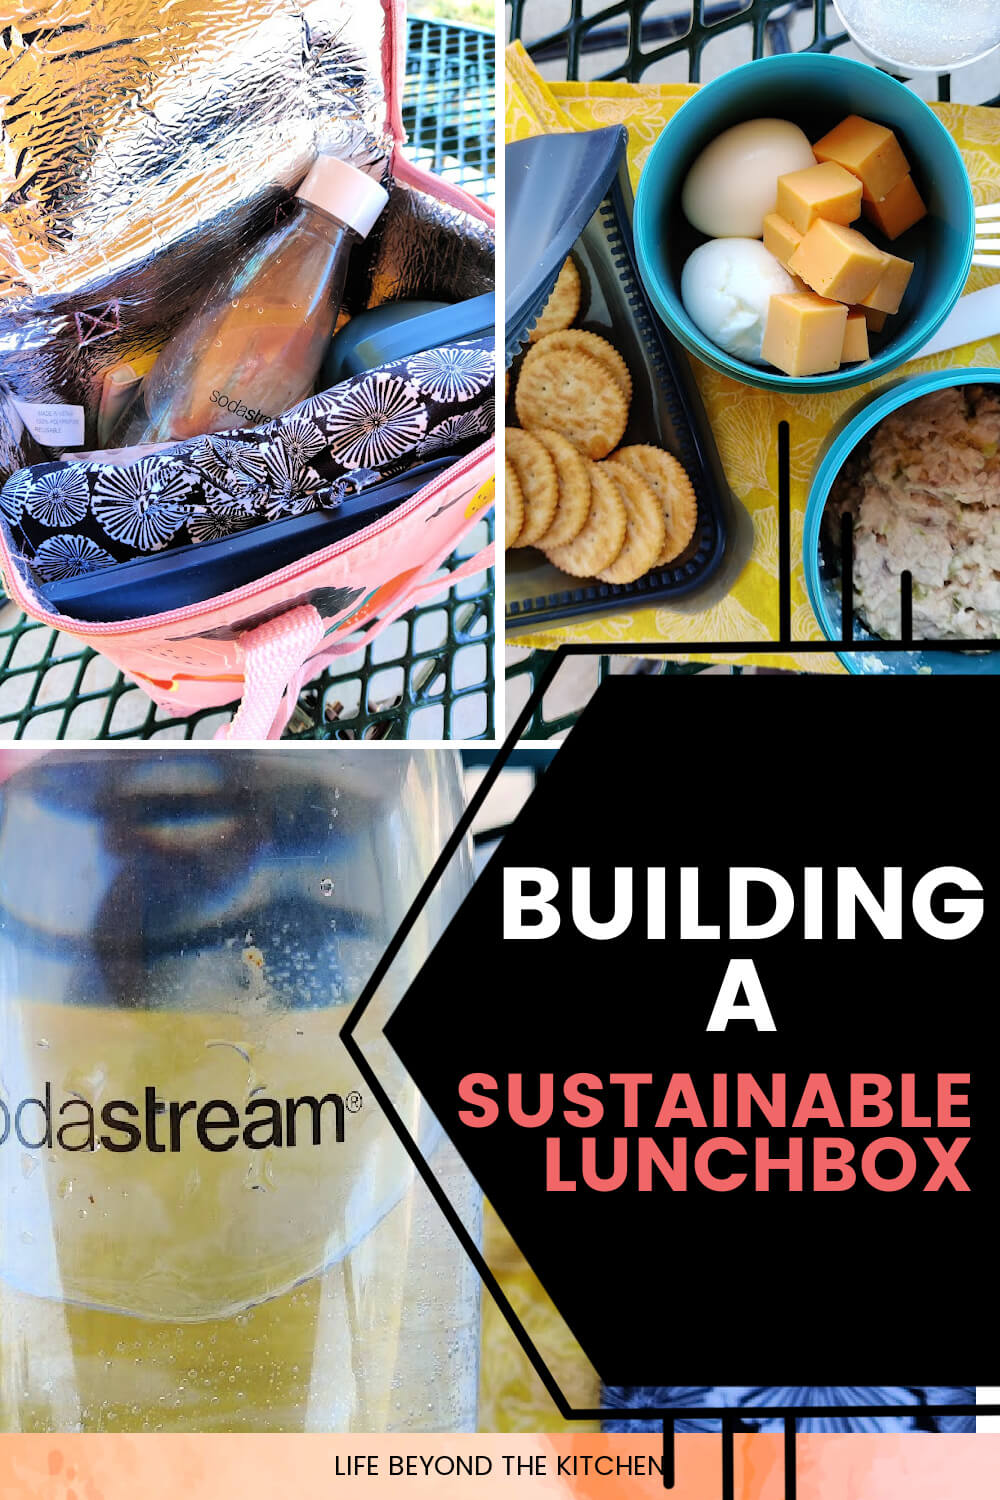 Creating a Sustainable Lunchbox